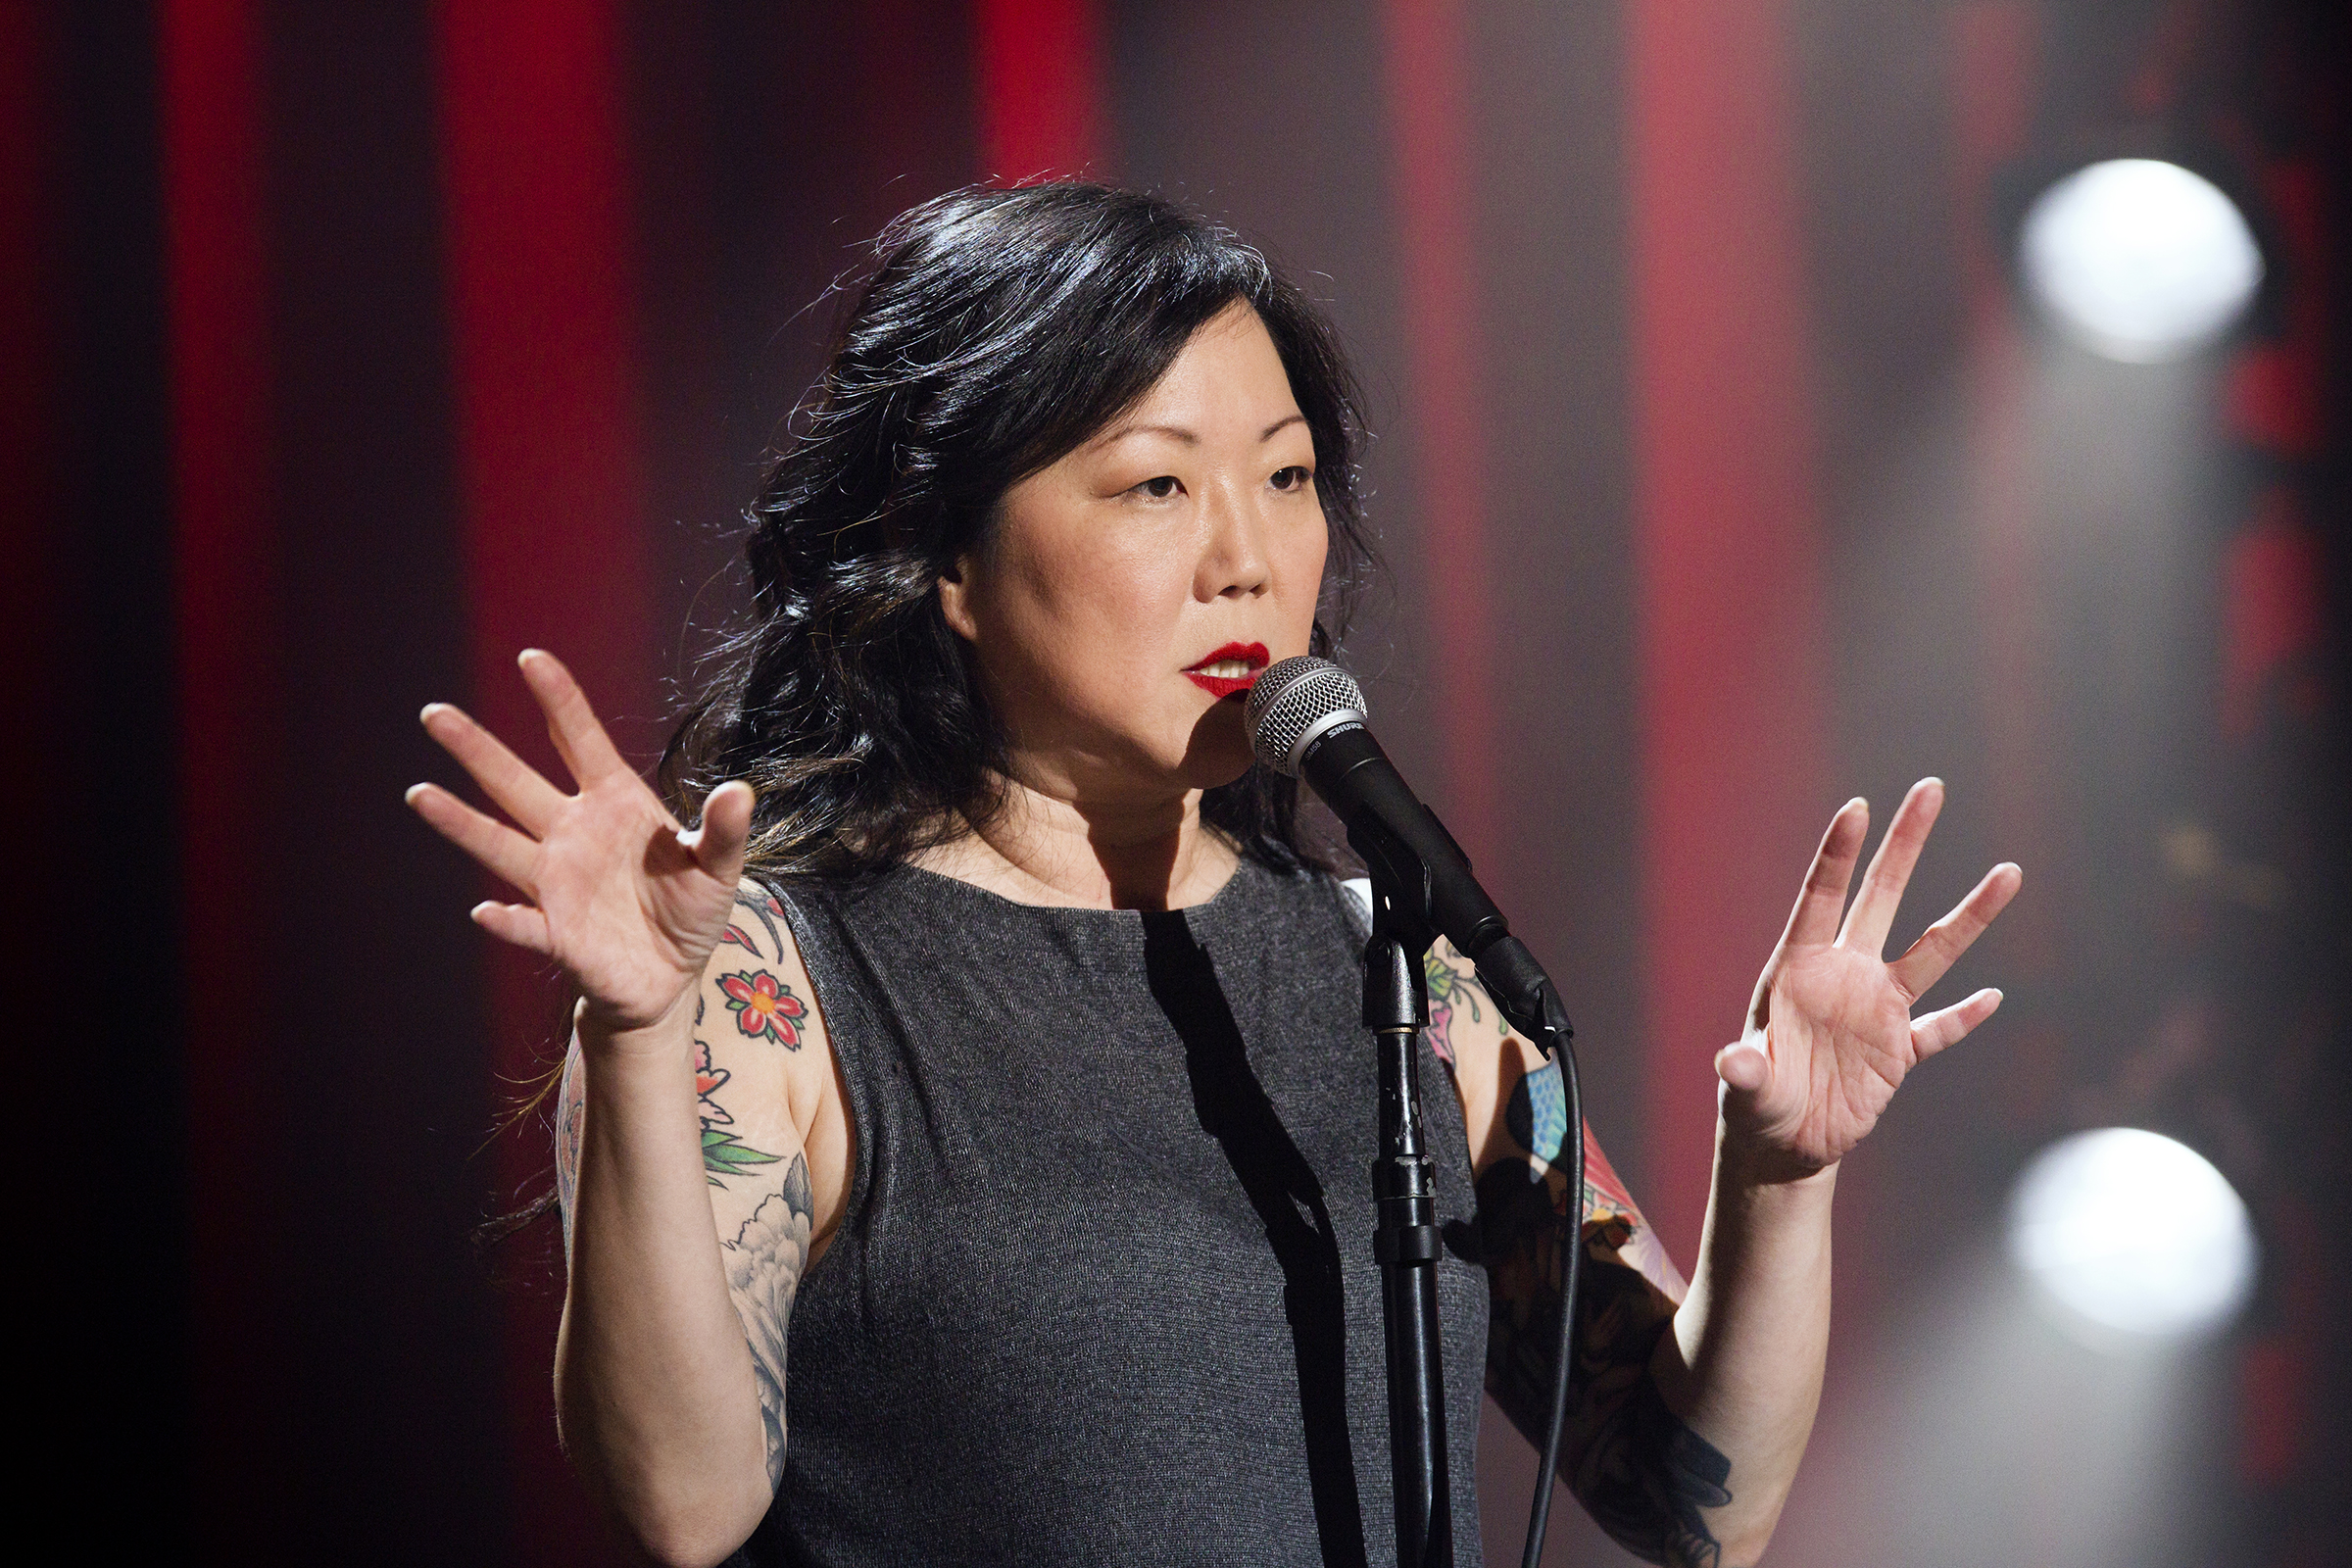 Margaret Cho live at the at the Gramercy Theater in New York City in MARGARET CHO: psyCHO. Copyright: Mindy Tucker/SHOWTIME. Photo ID: MARGARET CHO_psyCHO_3420988_UN_07